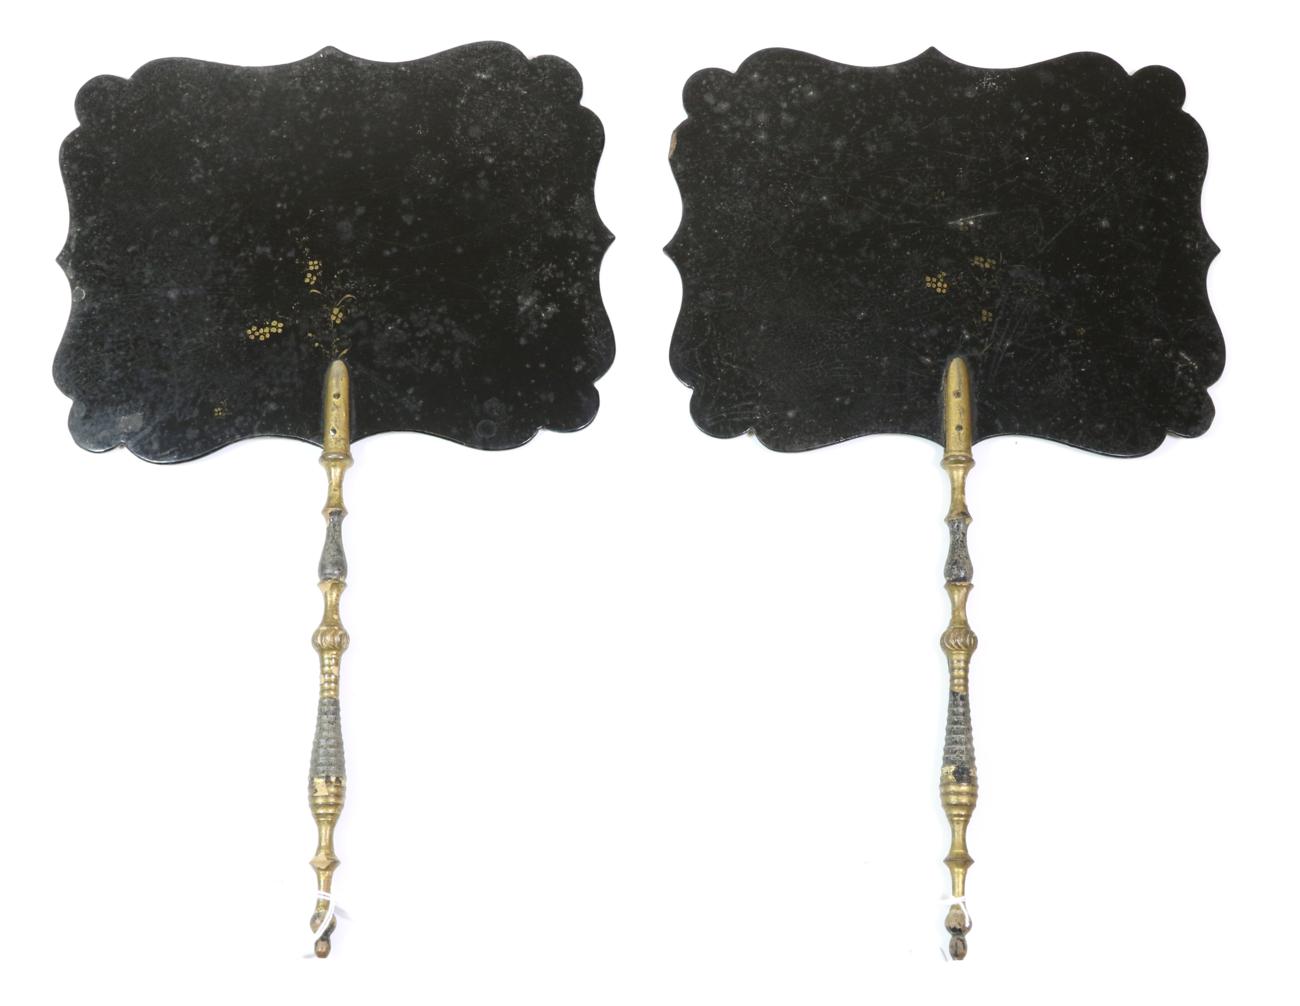 A Pair of Rectangular 19th Century Face Screens or Fixed Fans, lacquered in black and gilded, each - Image 4 of 4